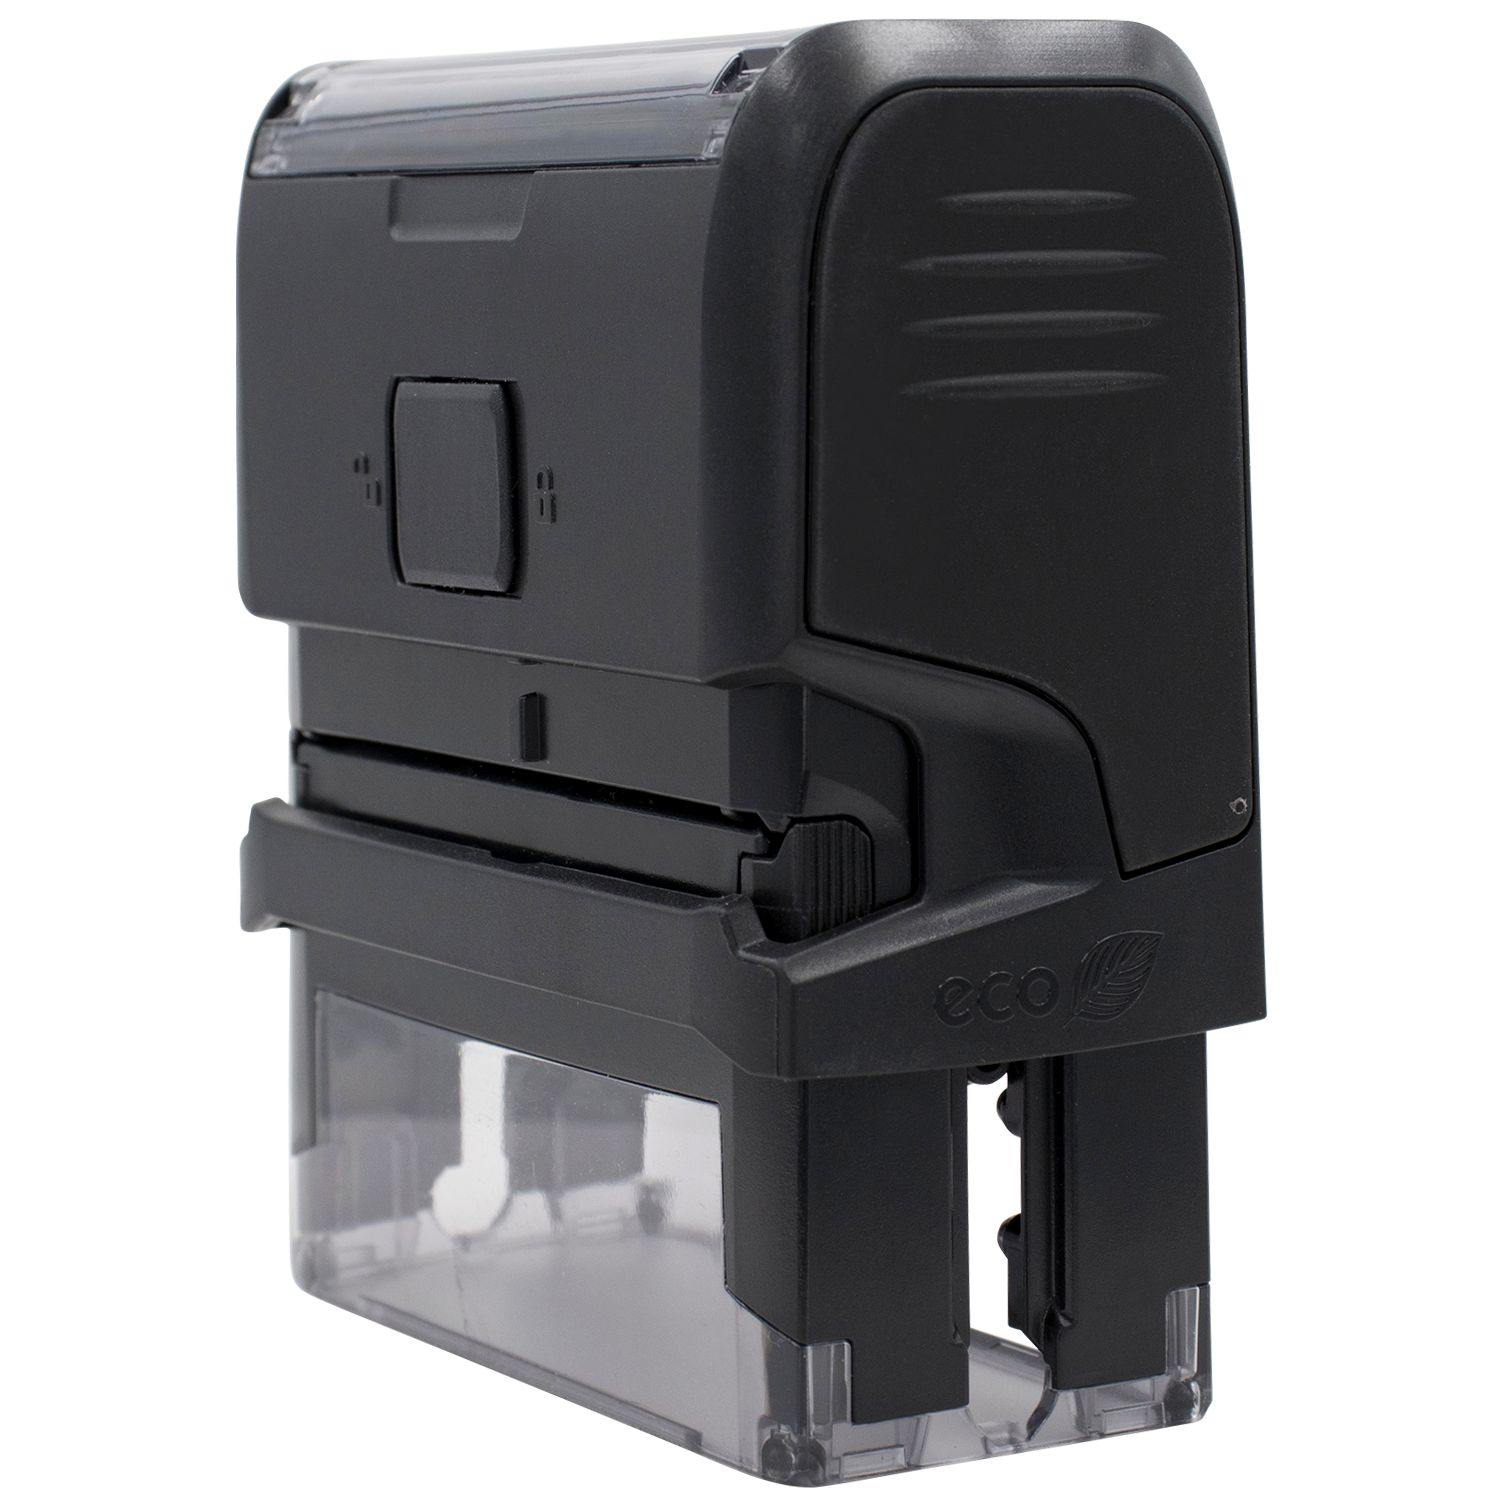 Side View of Large Self-Inking Client's Copy Stamp at an Angle